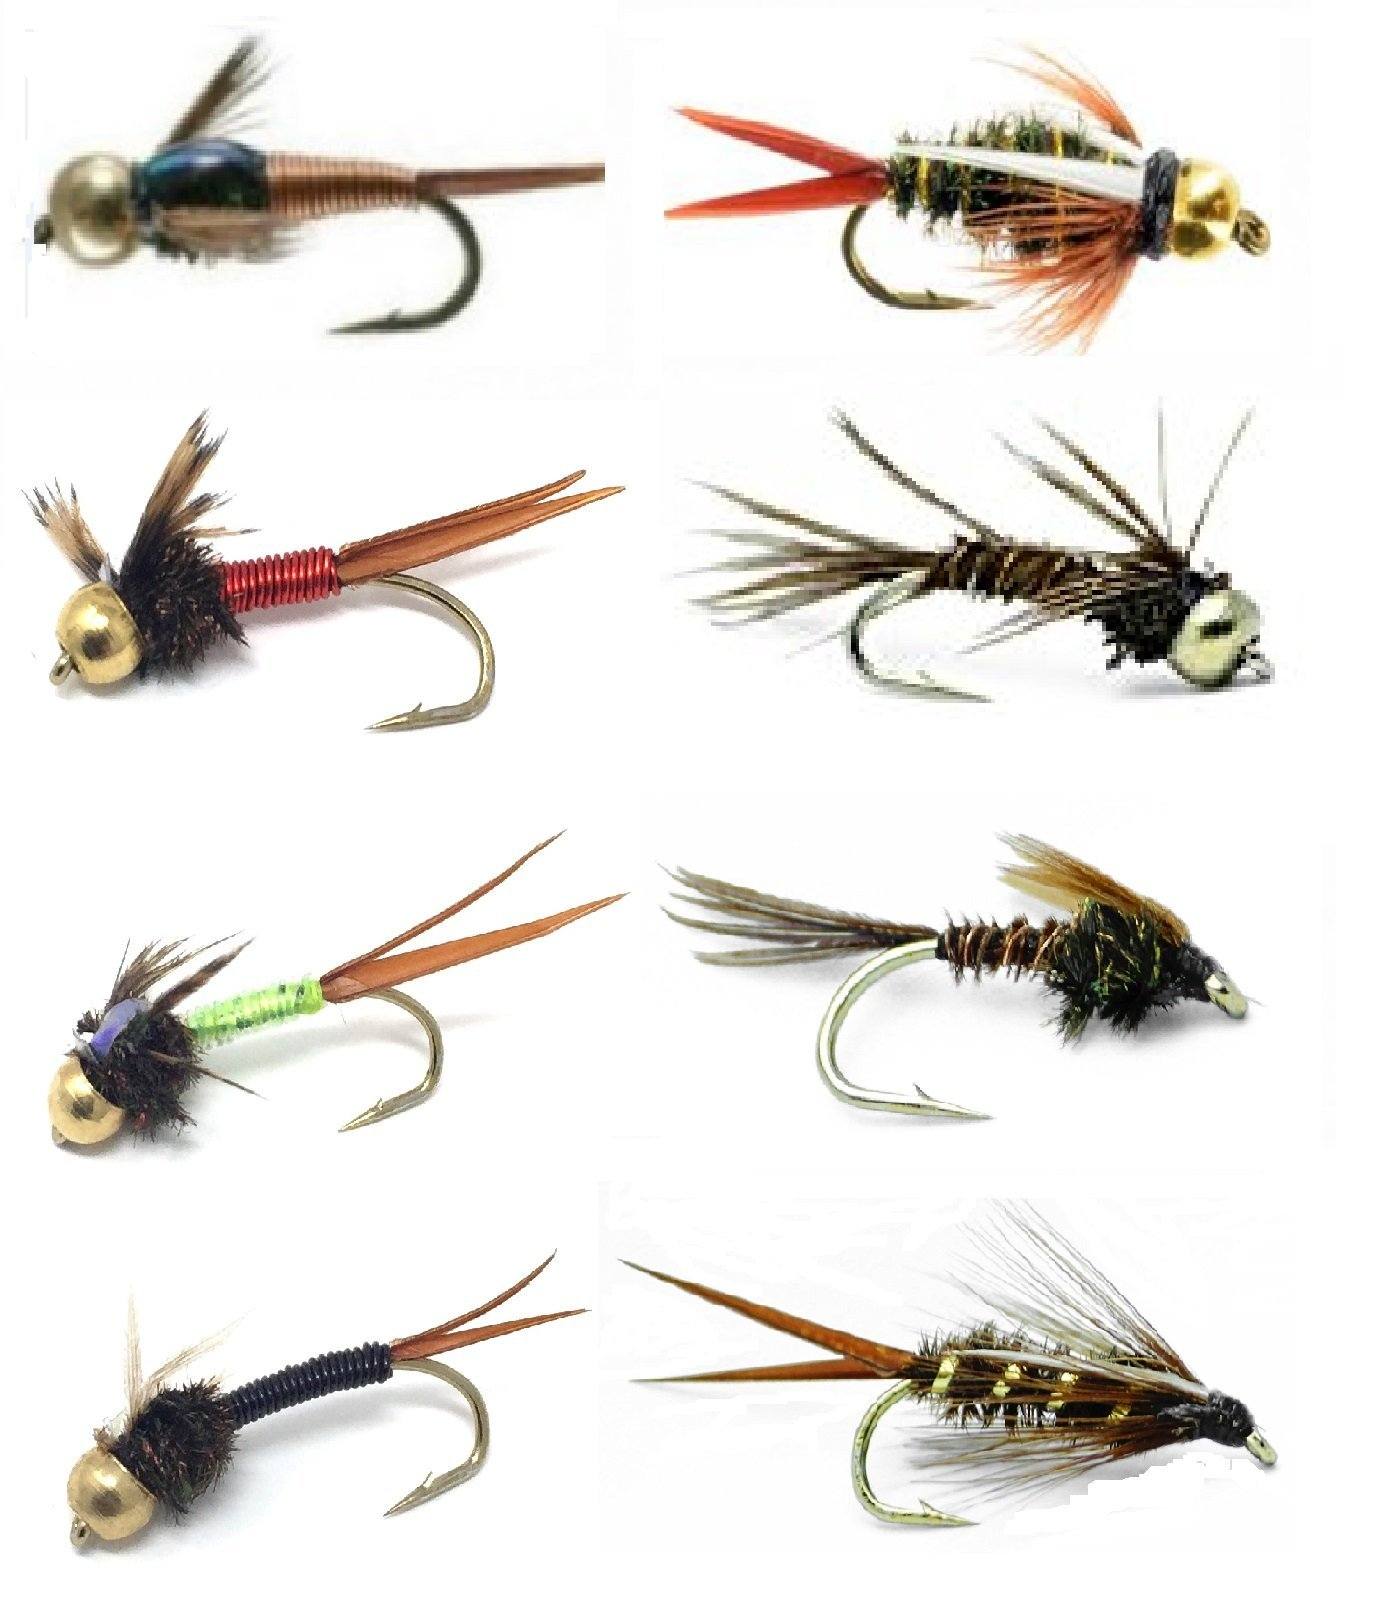 Fishing Tie, Lure Tie, Fishing Lure, Fly Tie, Fly Fishing Accessory